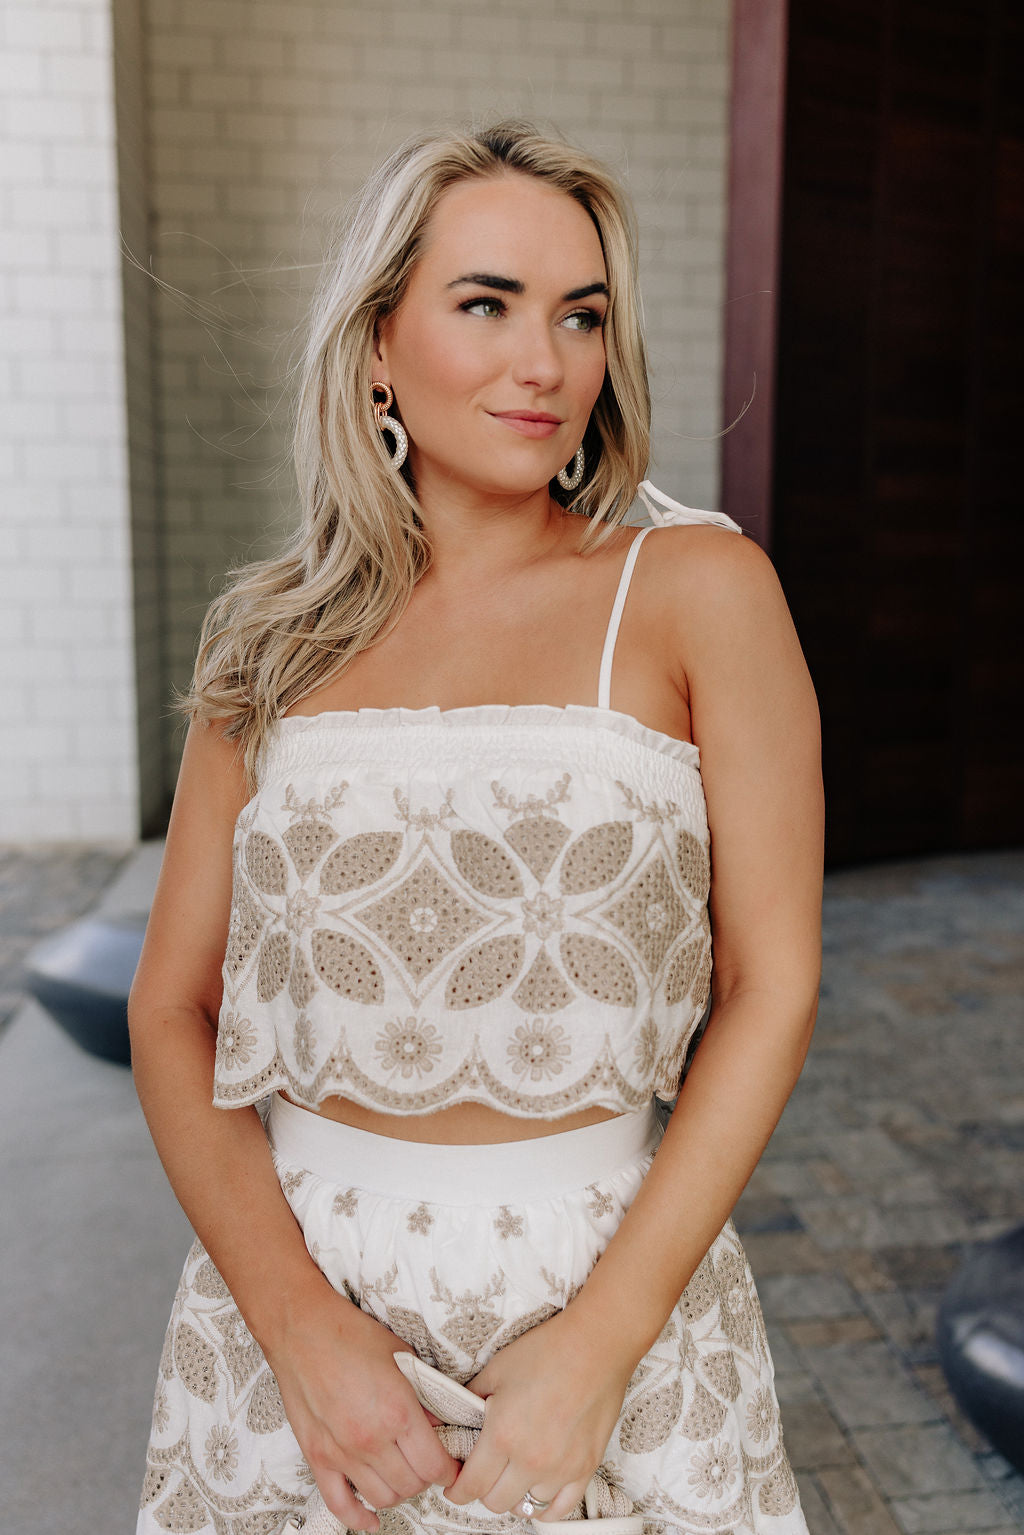 close up view of female model wearing the Alexandra White & Taupe Eyelet Tank which features White and Taupe Fabric, Eyelet Pattern, Scallop Hem, Ruffle Details, Square Neckline, White Lining and Tie Straps